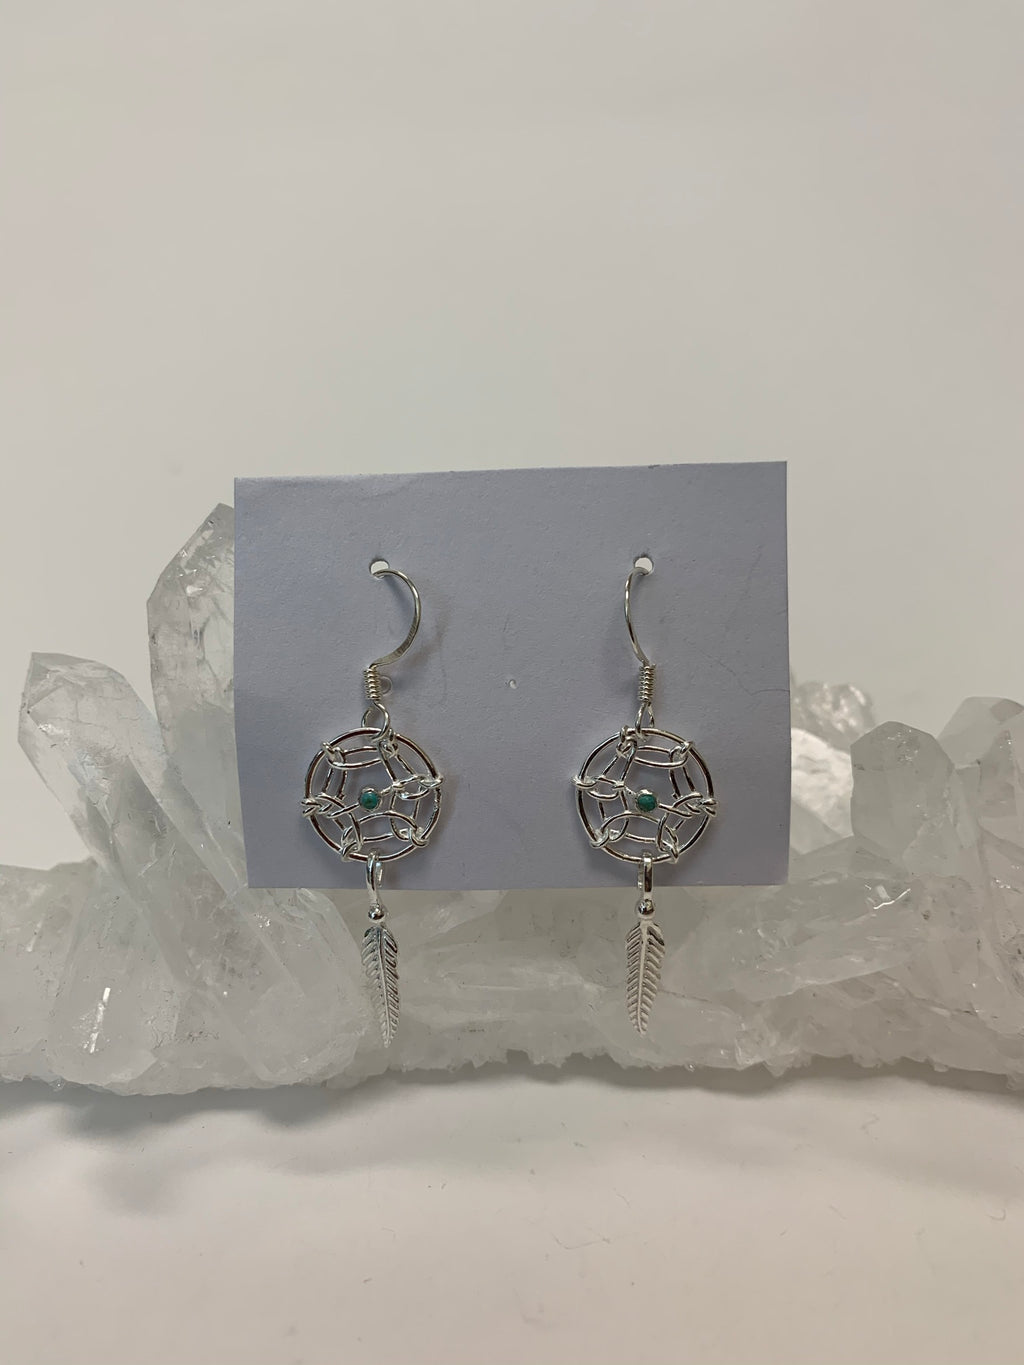 Tiny turquoise gemstones are set in the middle of a round dreamcatcher with a silver feather hanging beneath it. These earrings are very delicate, sweet and lightweight.  They have wires, not posts and are approximately 1½" long.